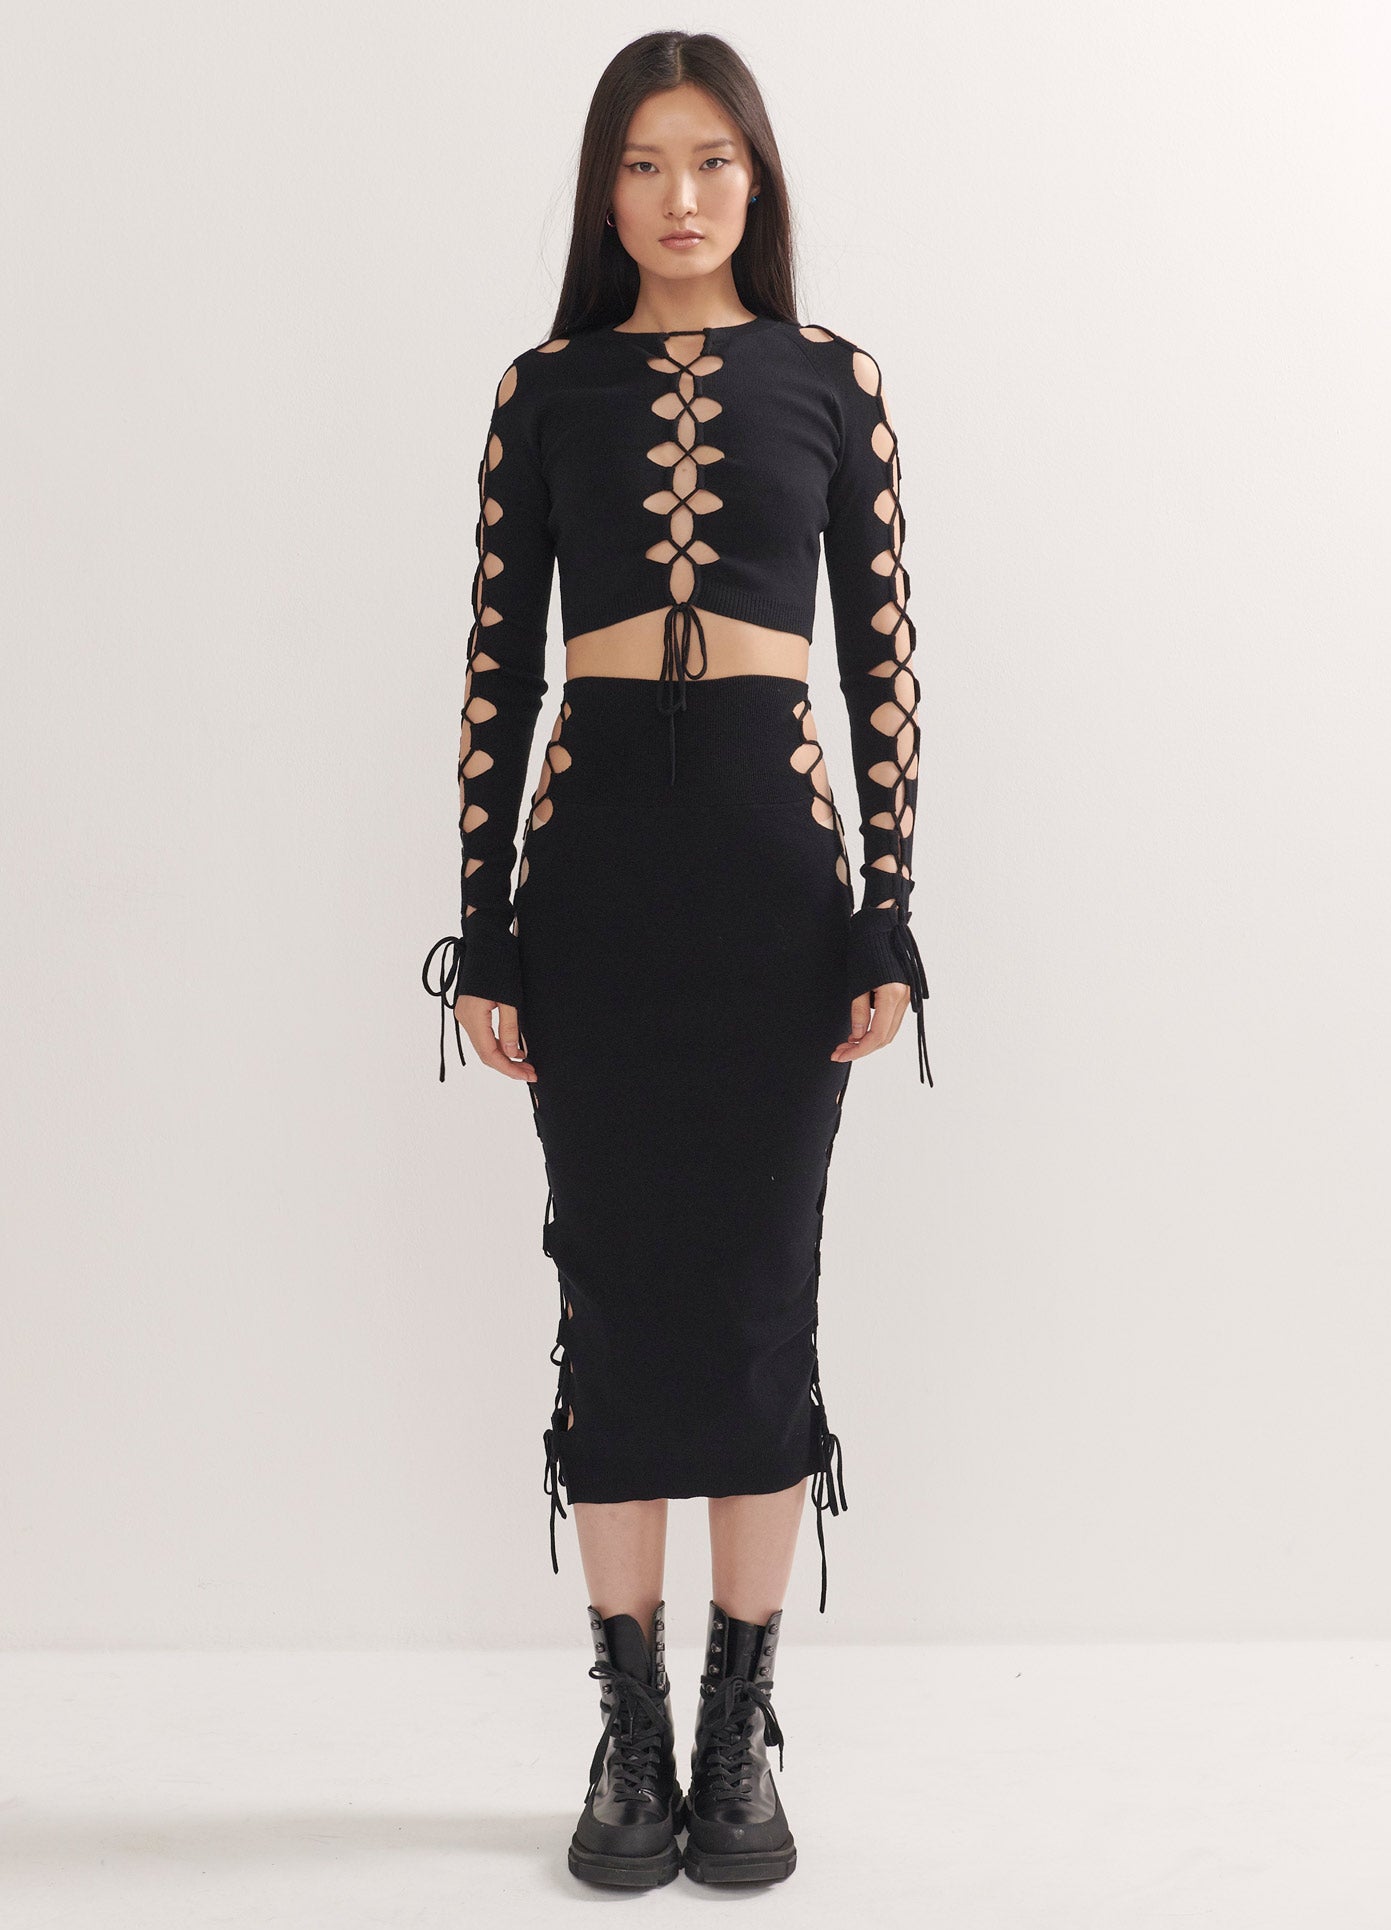 MONSE Lacing Detail Cropped Sweater in Black on Model Full Front View